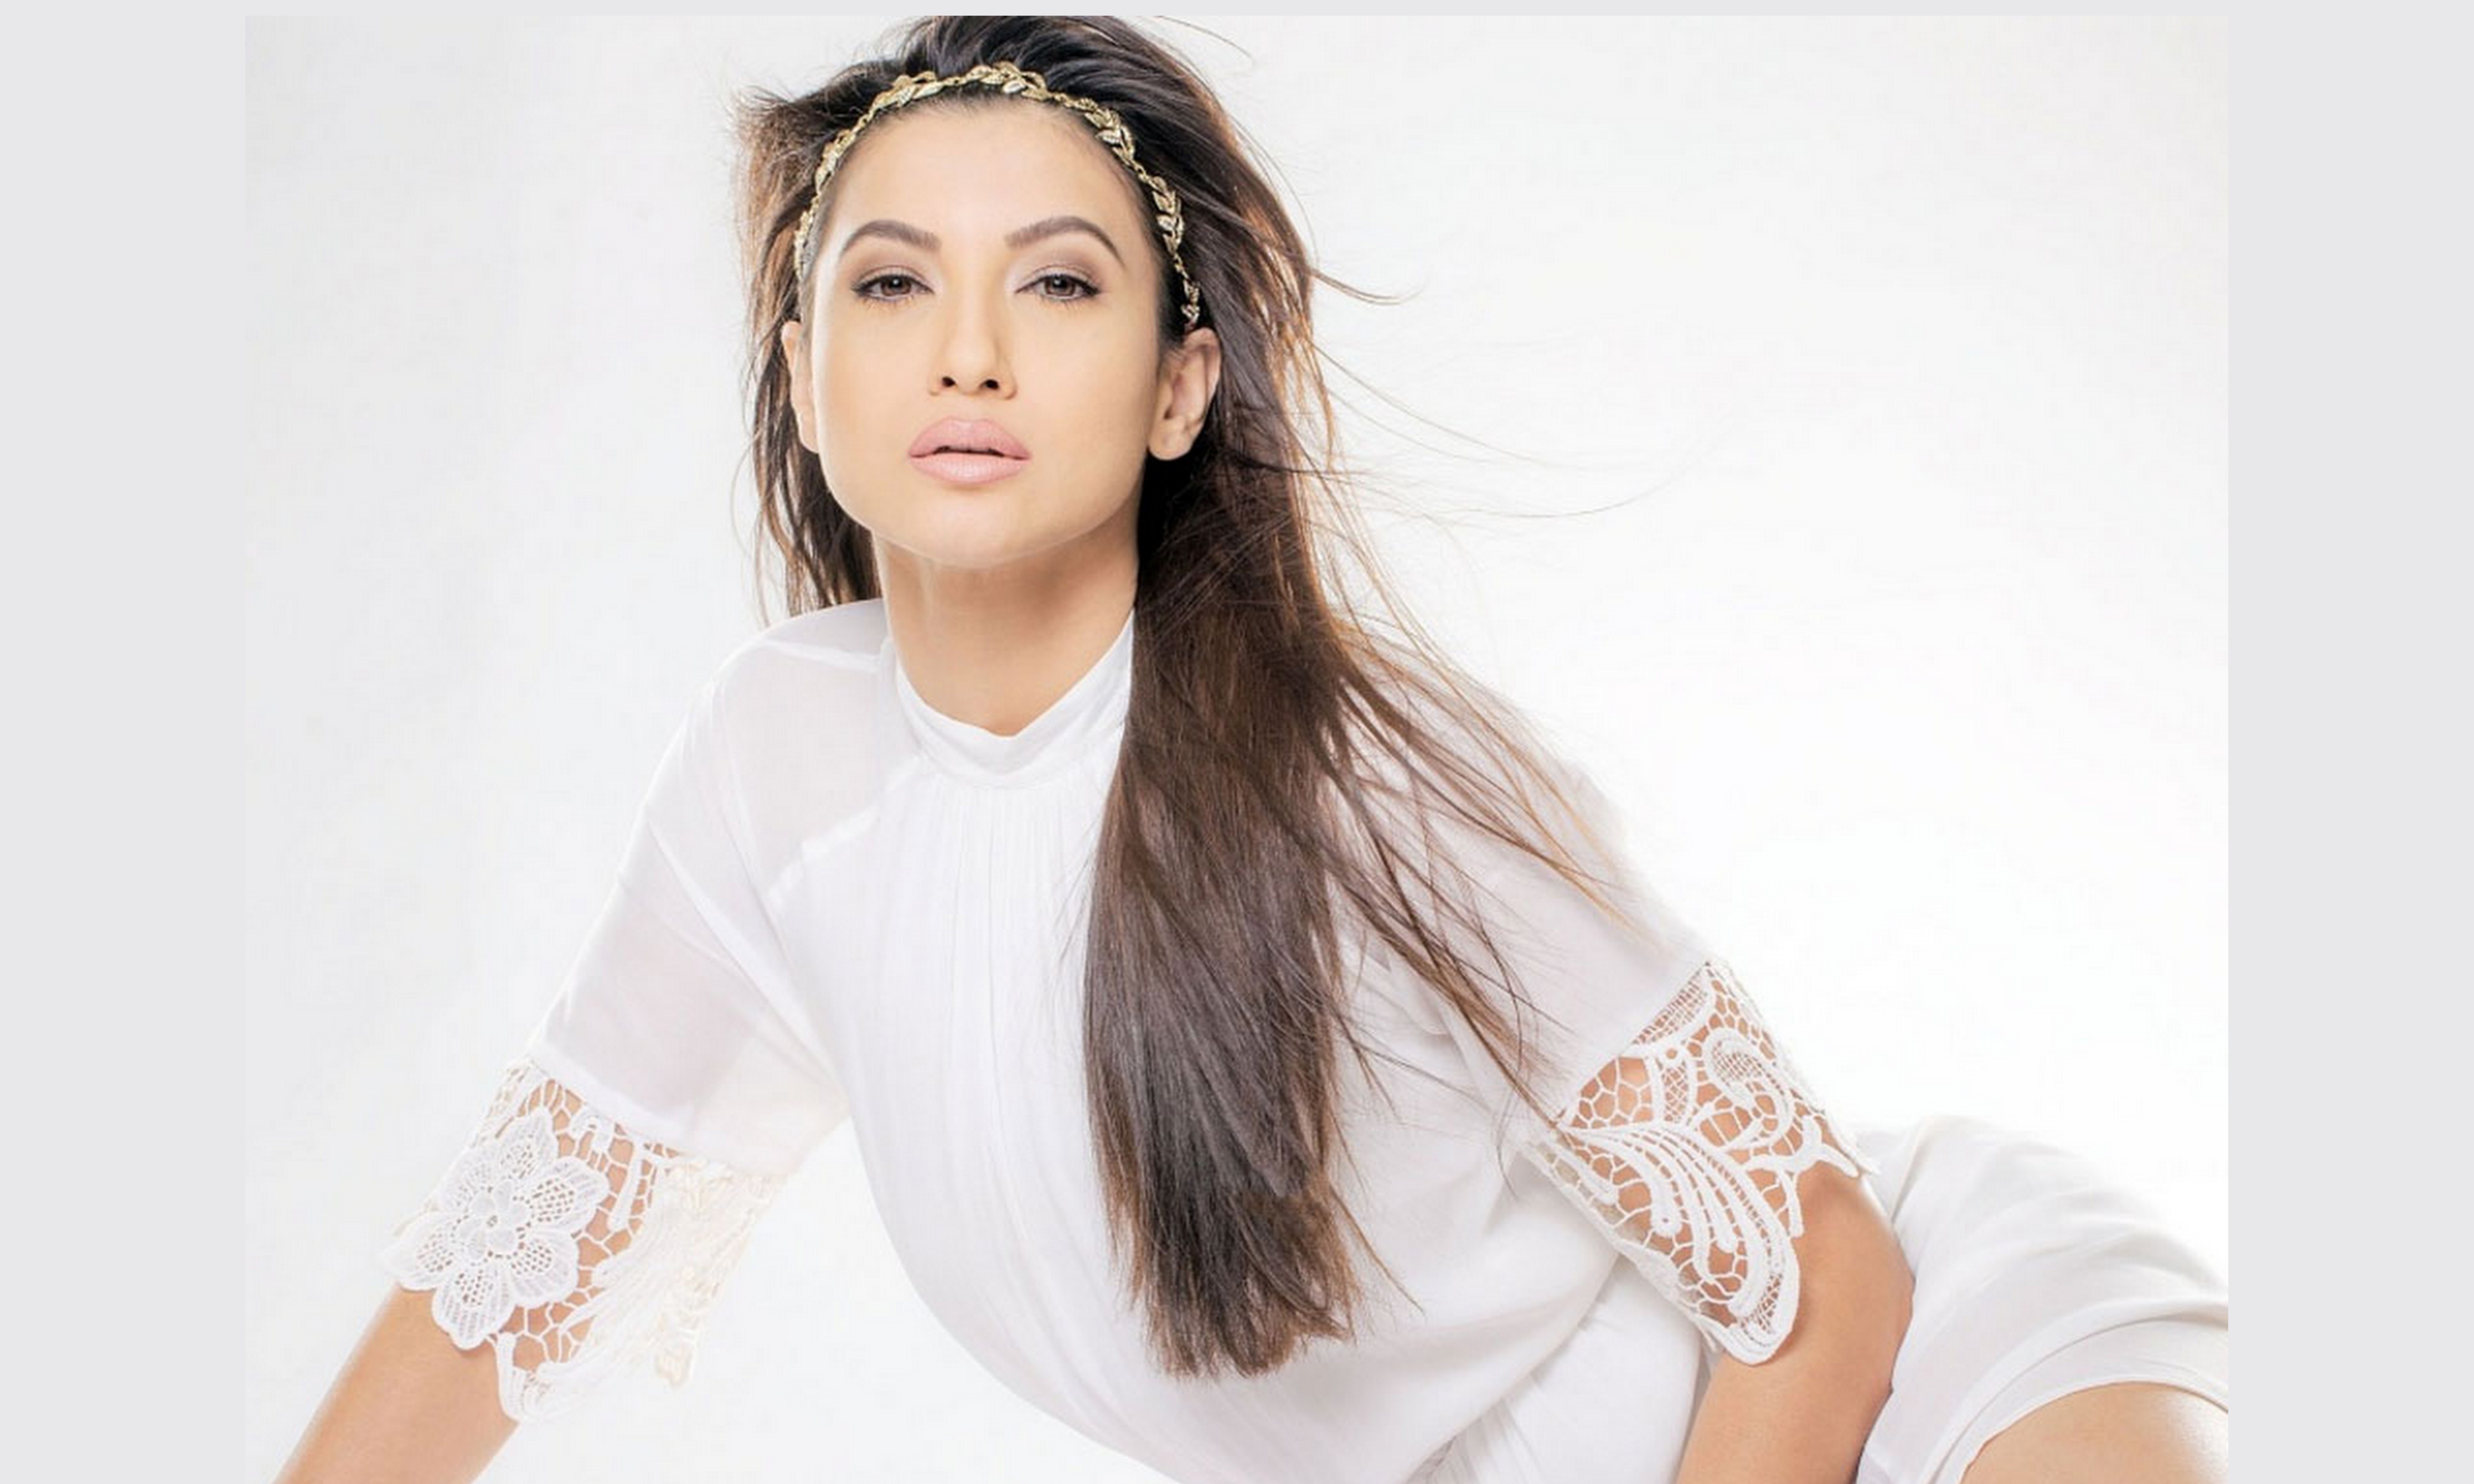 Will speak up if I face sexual harassment, says Gauahar!